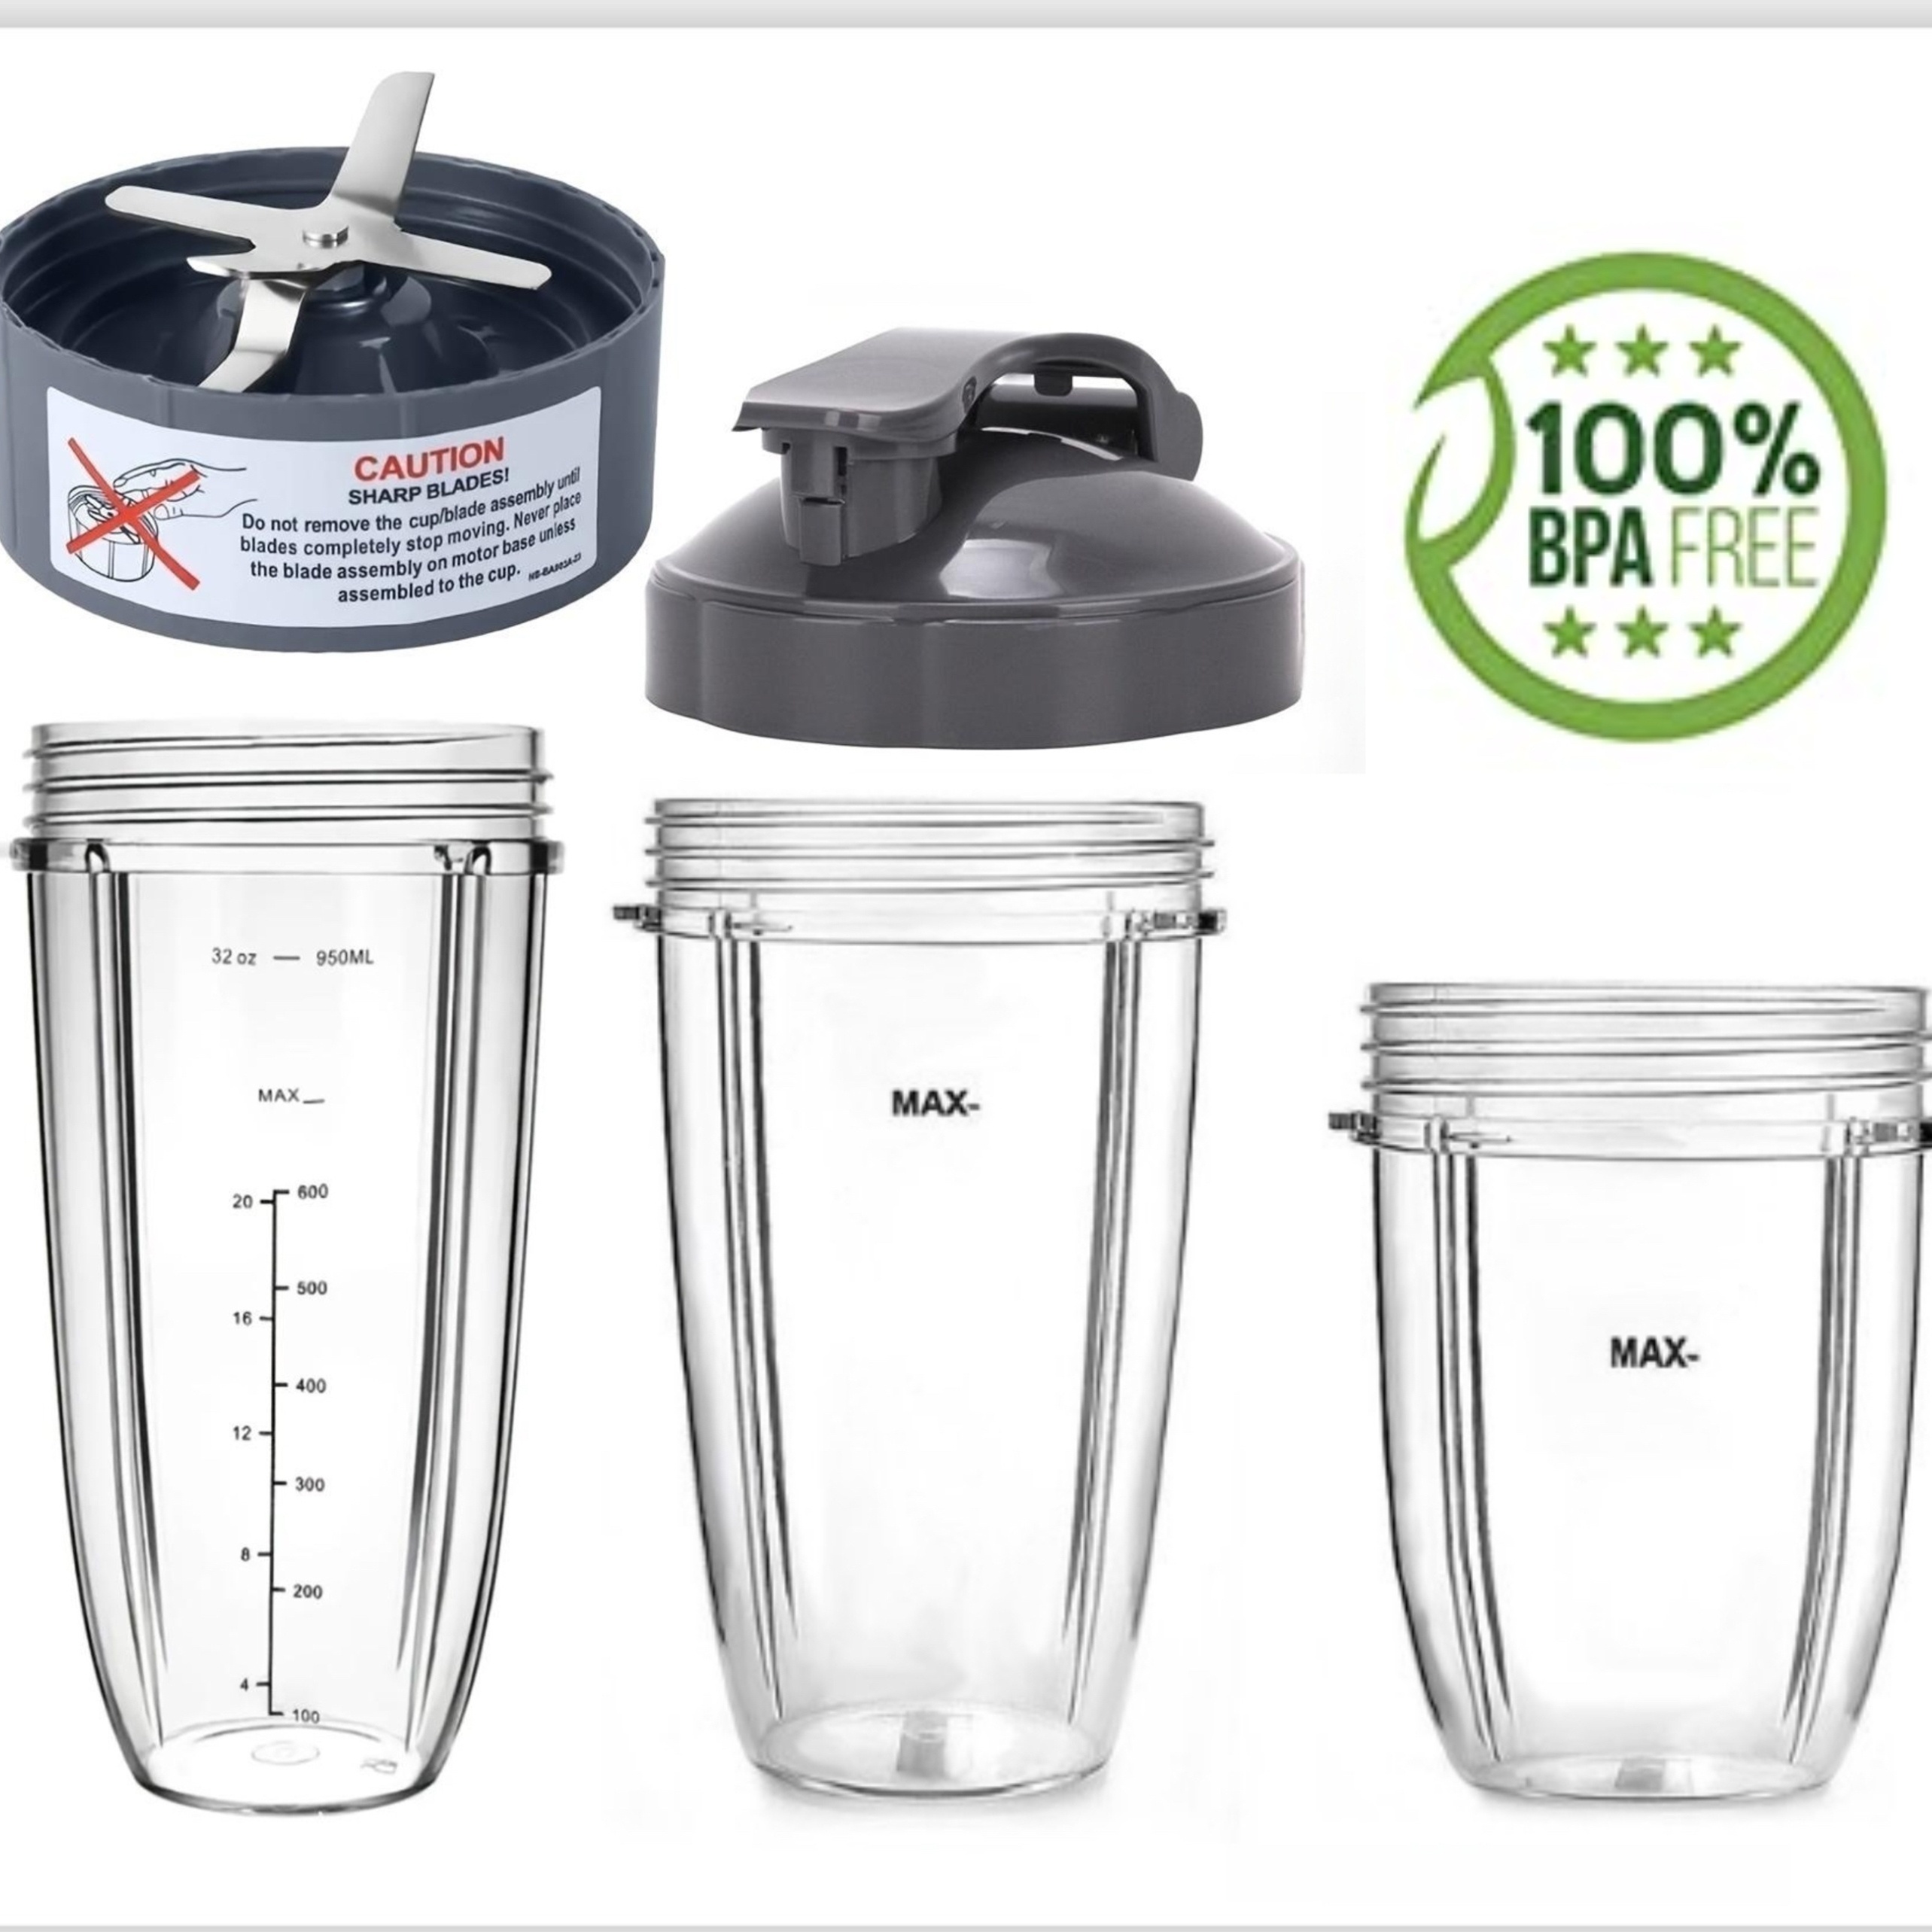 Replacement Cups For Nutri Ninja Blender- 18/24/32 oz Cups with Spout Lids